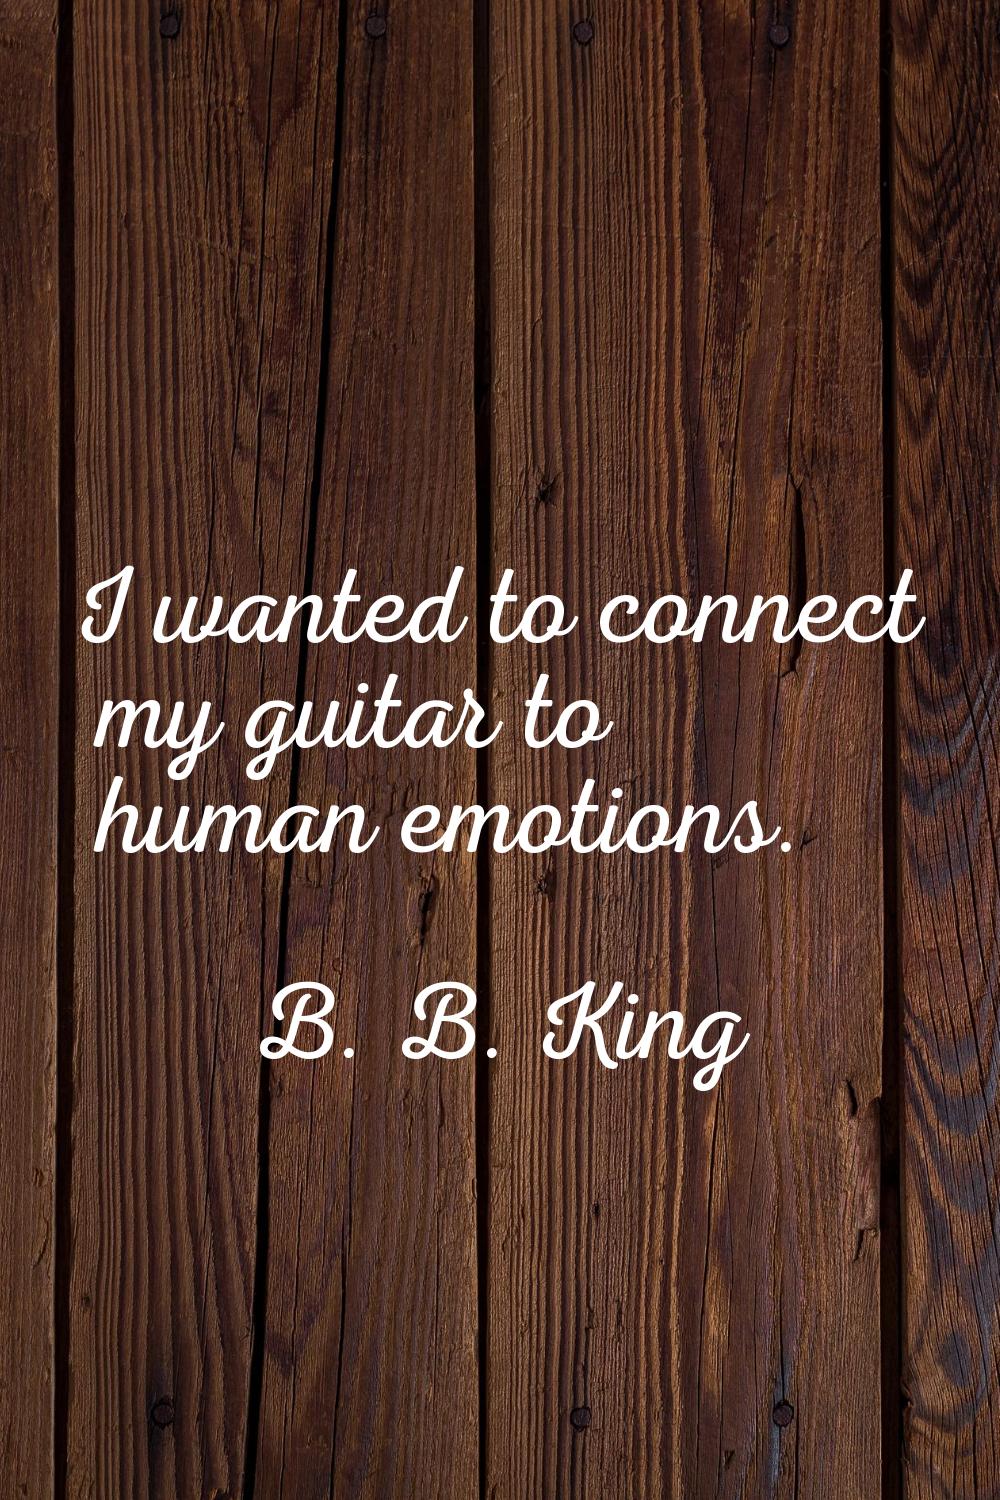 I wanted to connect my guitar to human emotions.